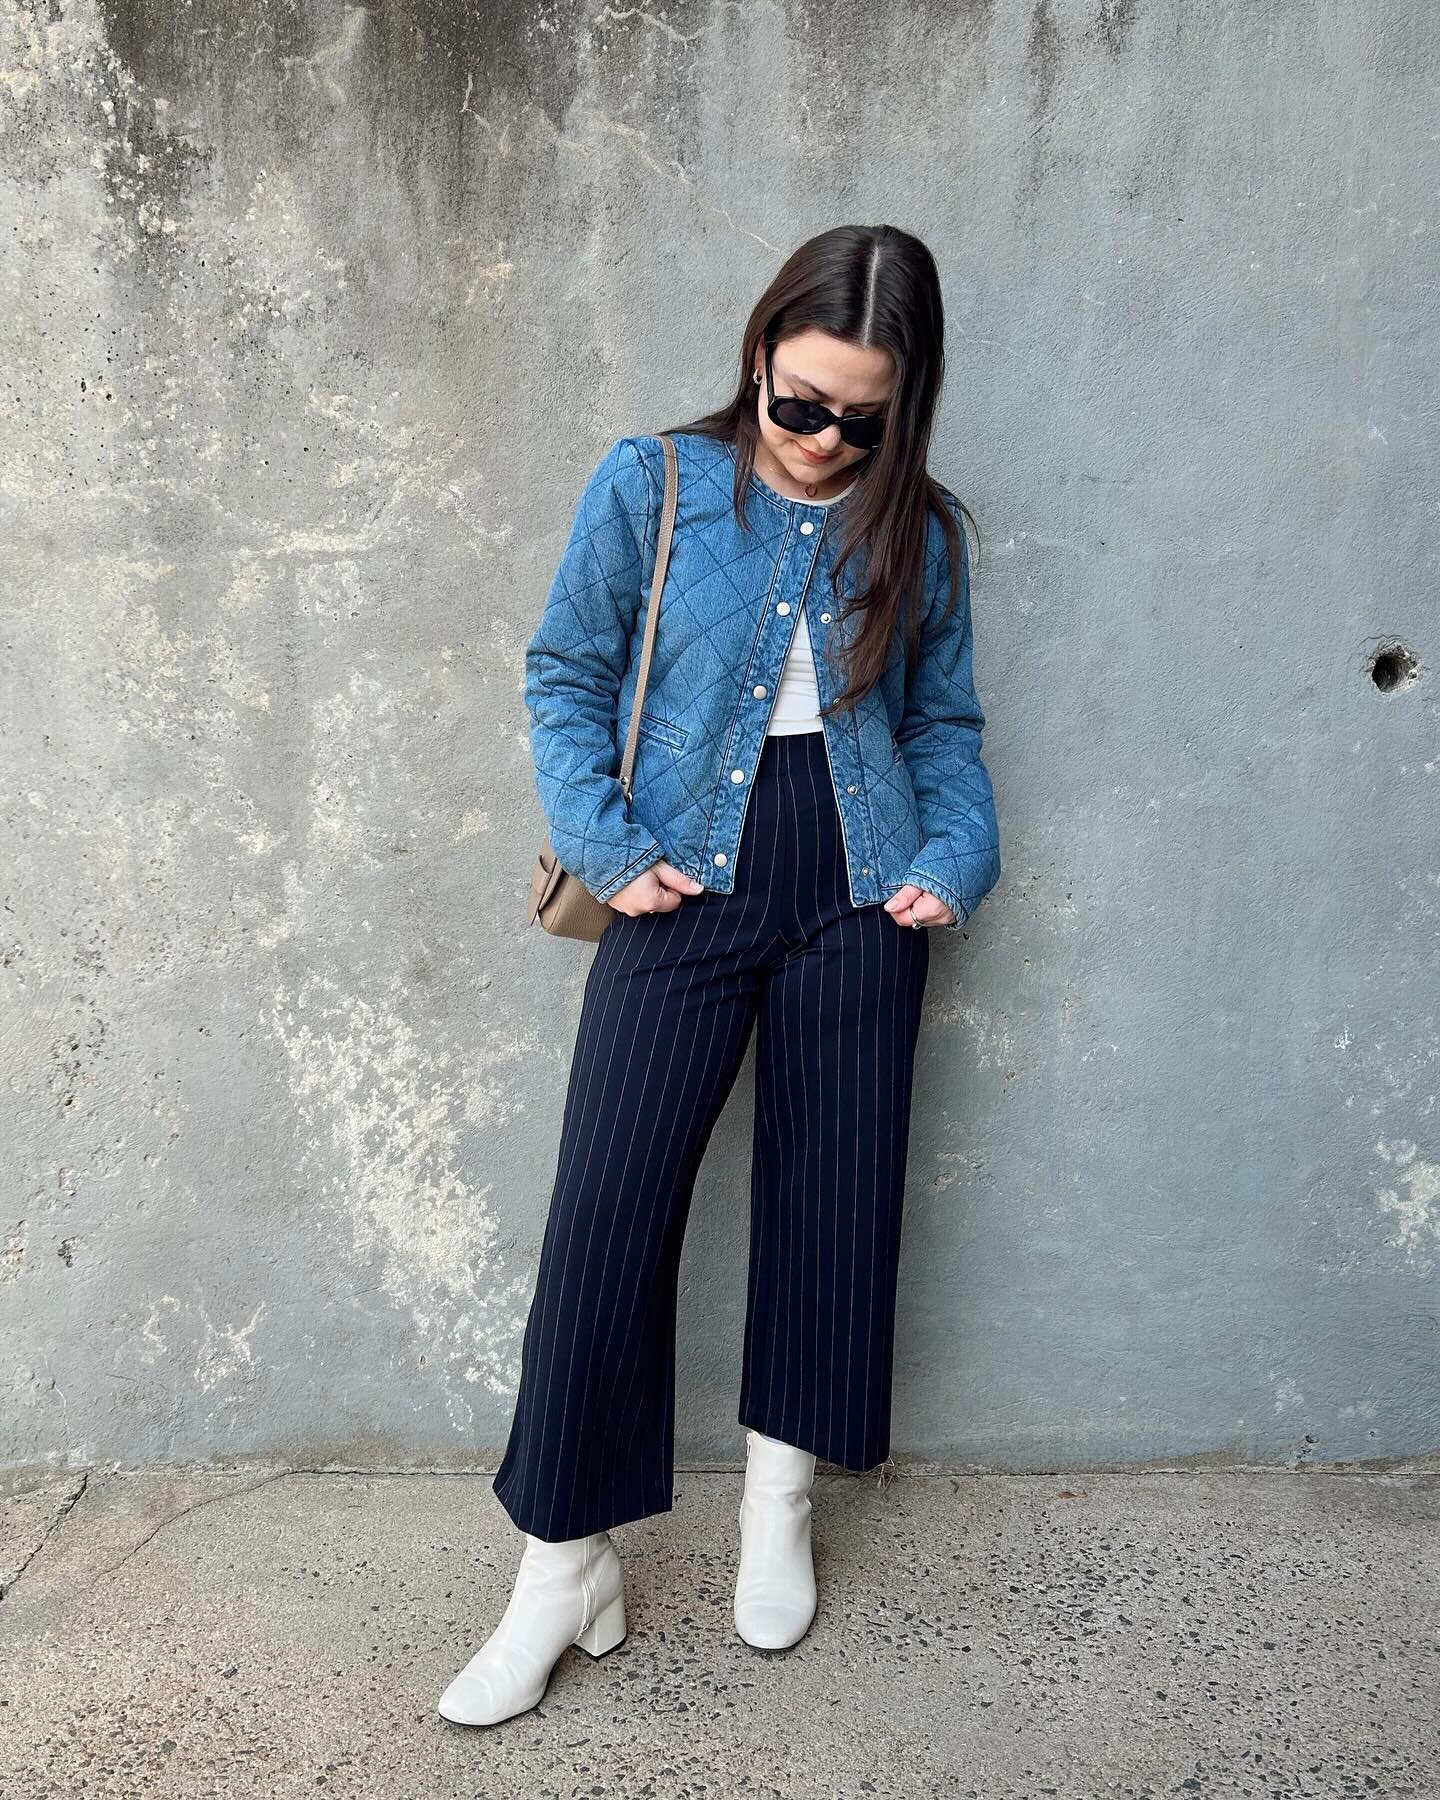 denim girl for life ✨💙

#quiltedjacket #denimjacket #navytrousers #springfashion #springstyle #springoutfits #outfitinspo #outfitideas #simplestyle #simpleoutfit